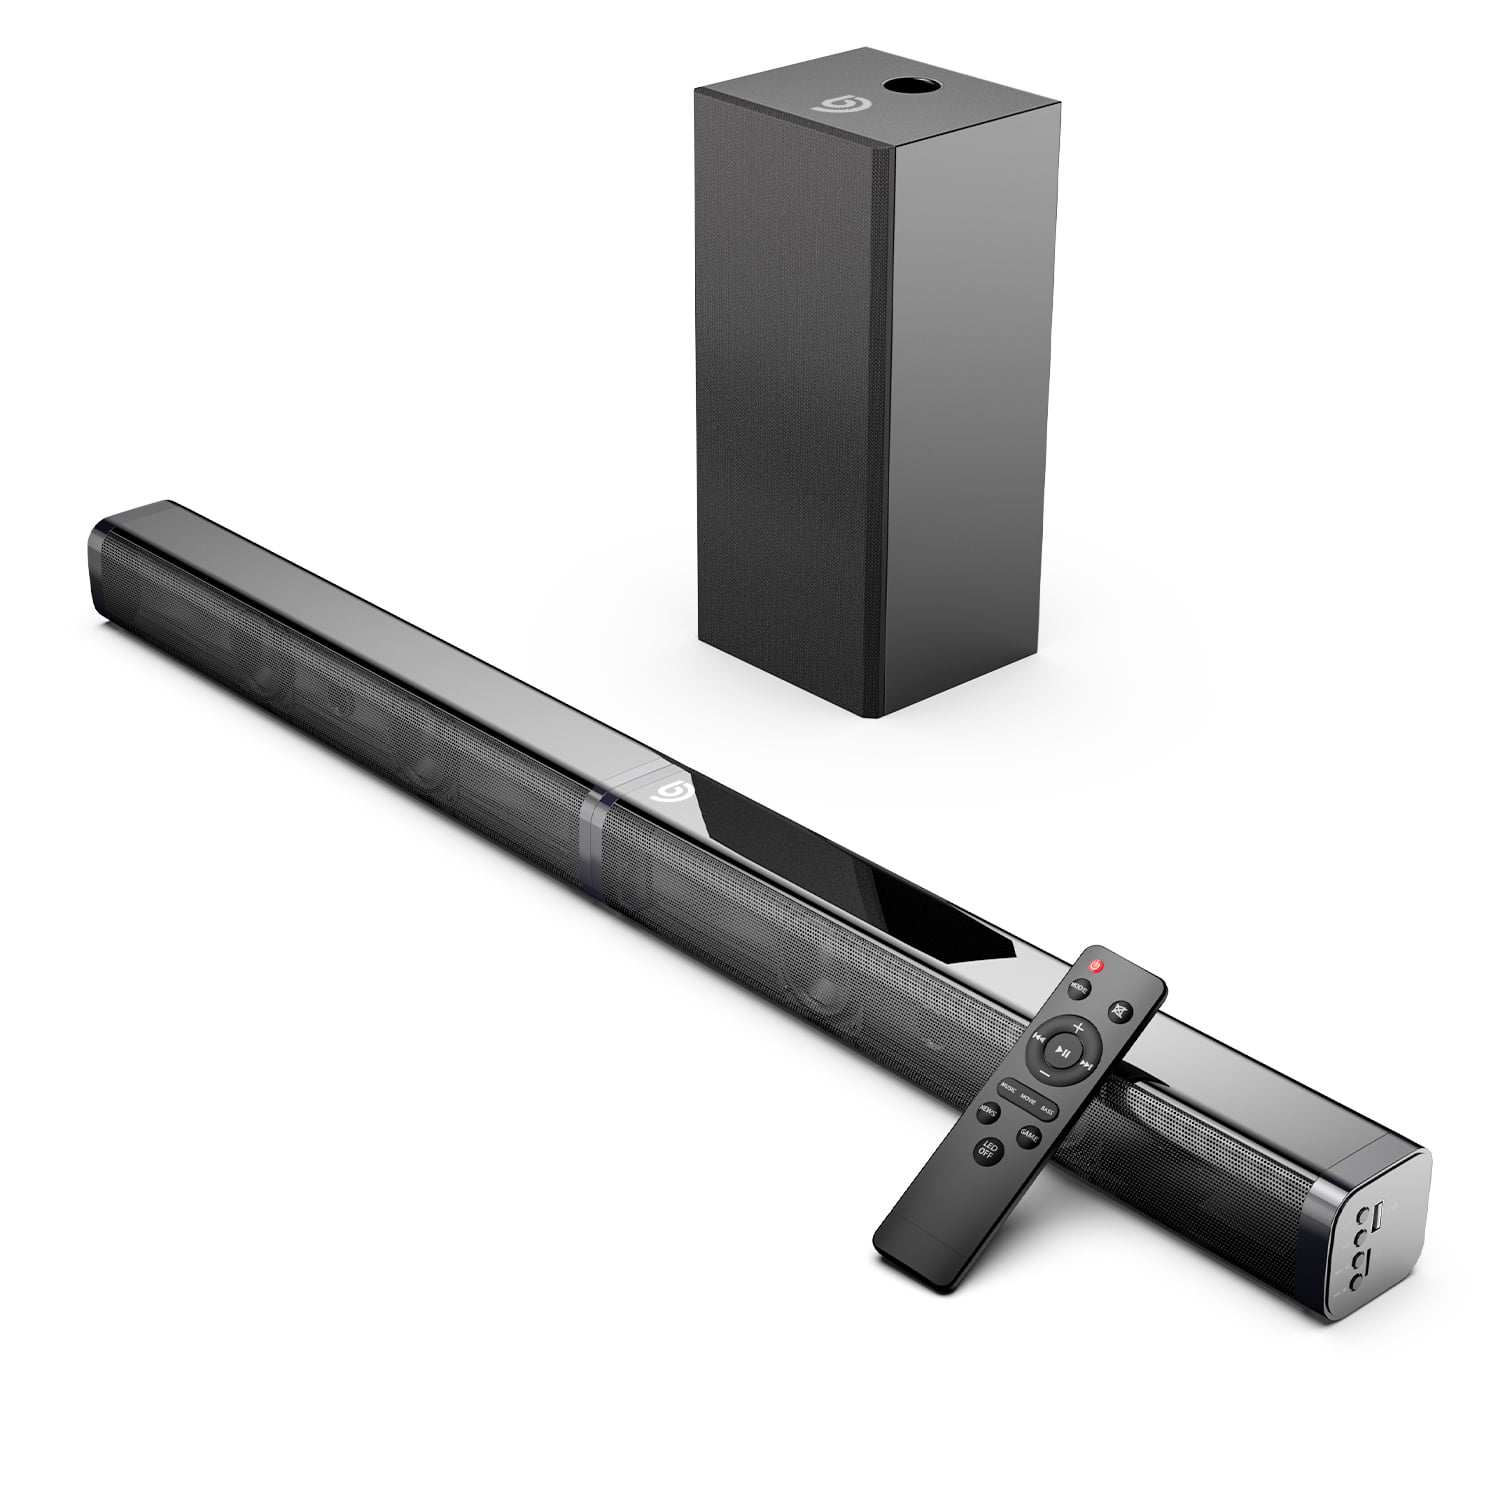 Ultra Slim 2.1 CH Sound Bar for TV Deep Bass 5 EQ Modes Bomaker Soundbar with Subwoofer Optical and RCA Cables Included